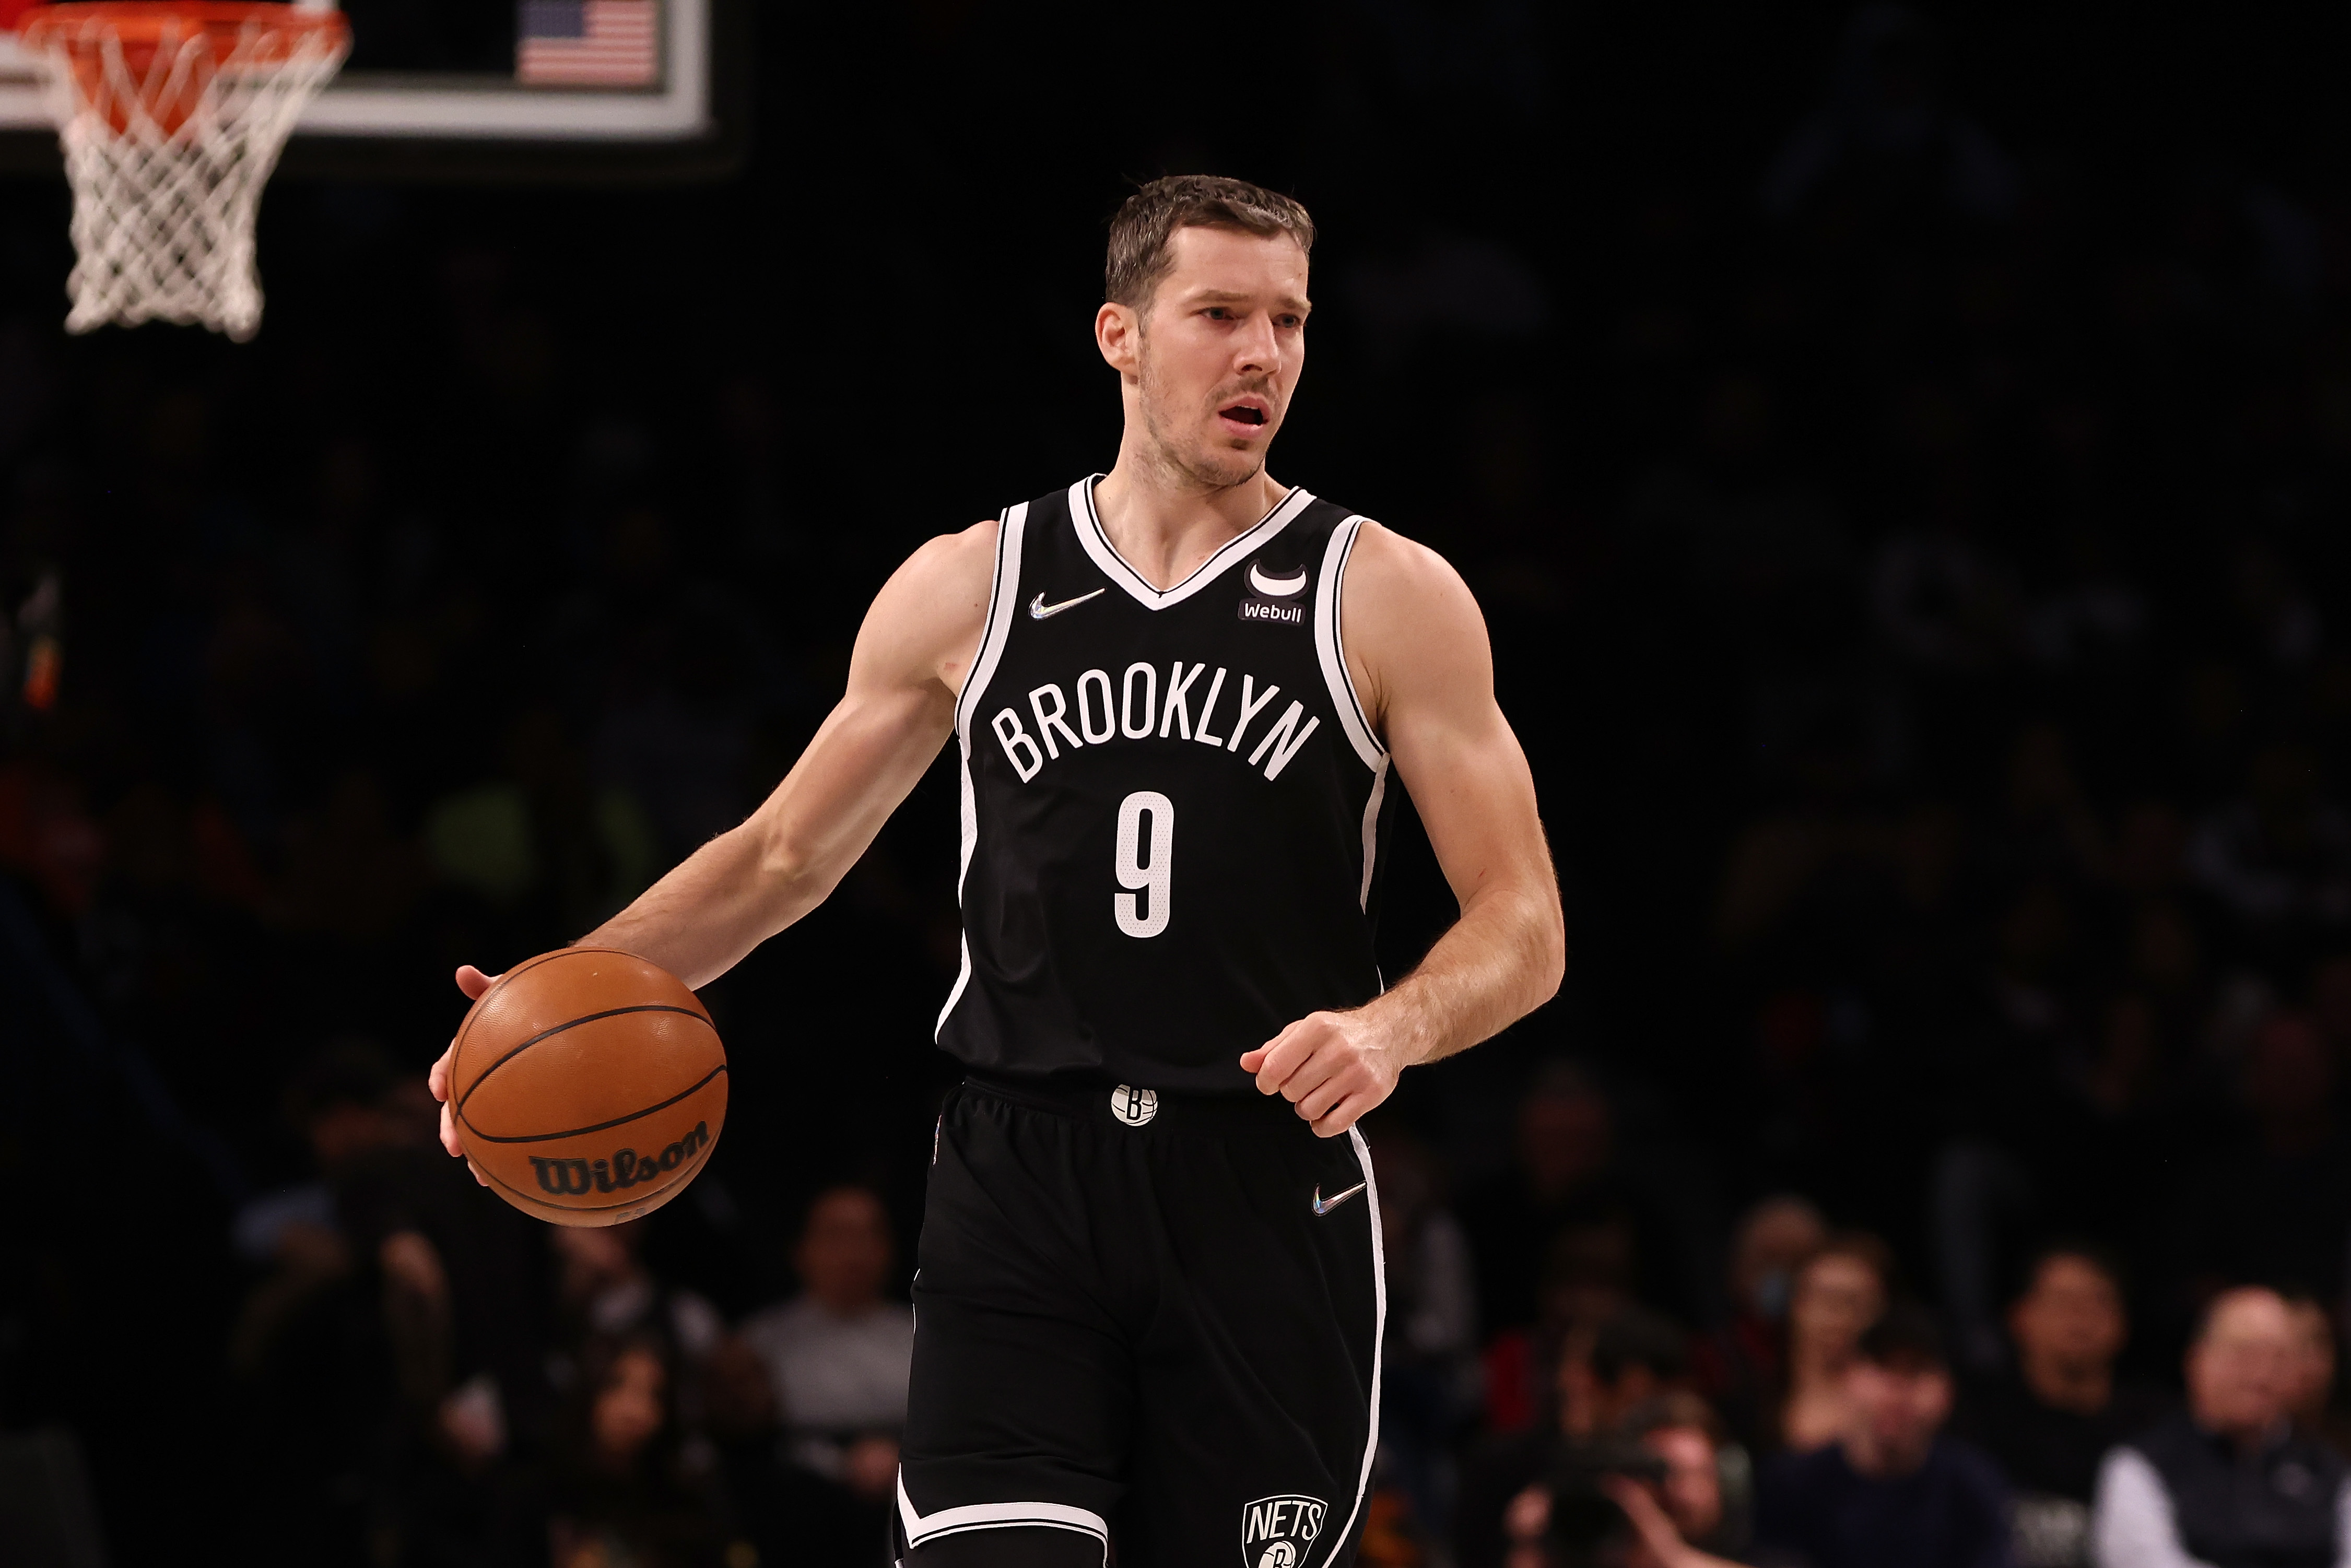 Goran Dragic chose Nets over Bucks and Clippers thanks to Steve Nash